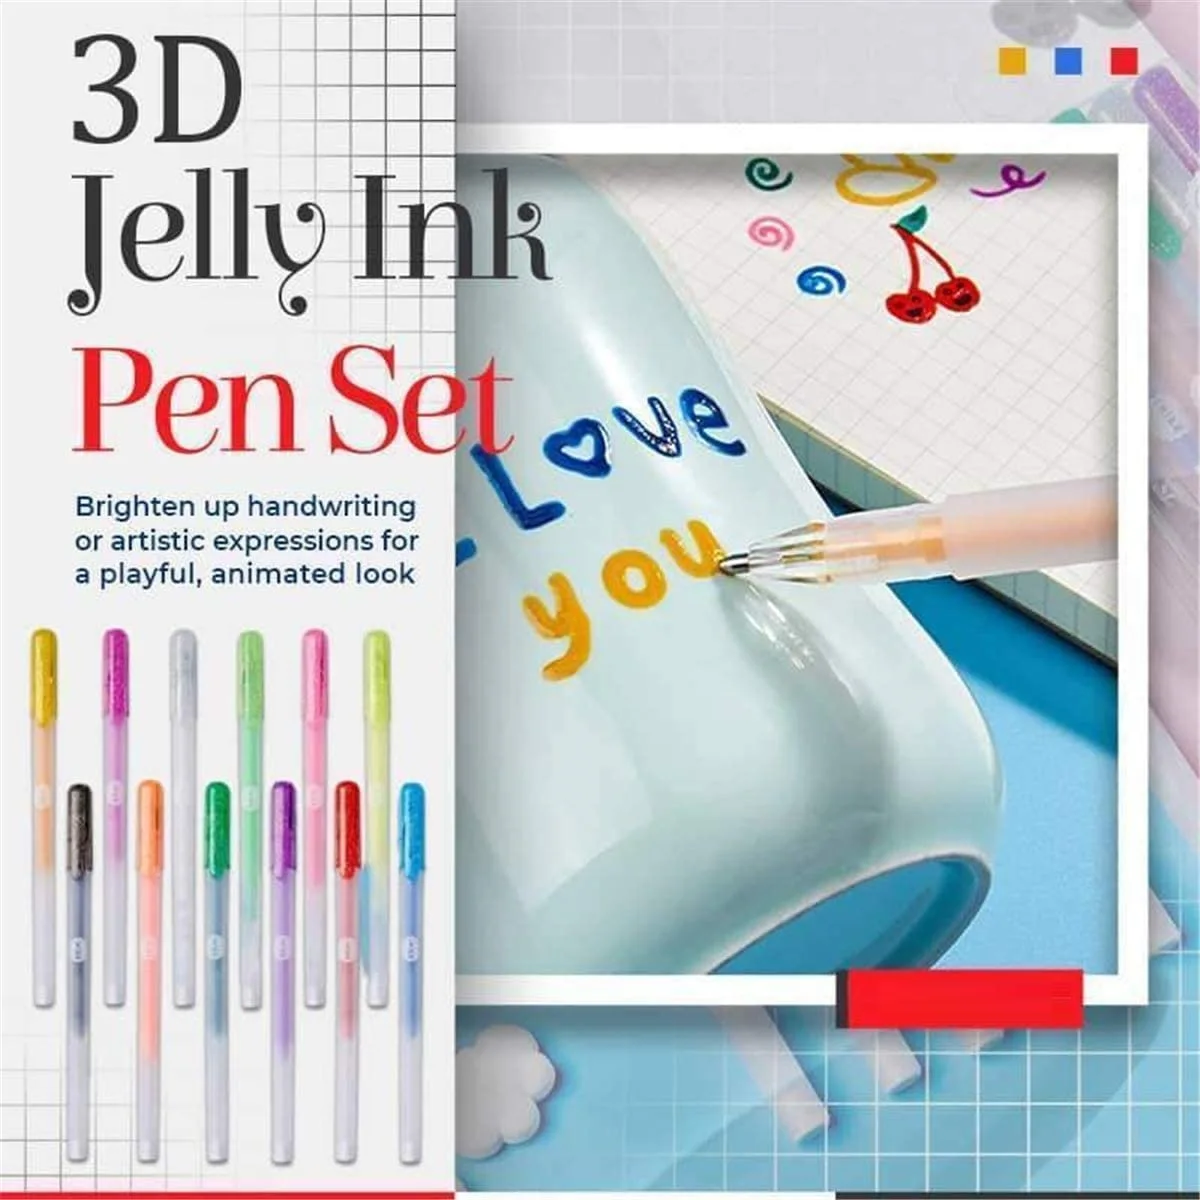 

6pcs 3D Jelly Pens Set Bright Color Art Marker Pen 1.0mm Bold Point for Handwriting Highlighting Drawing Paint DIY School A6291